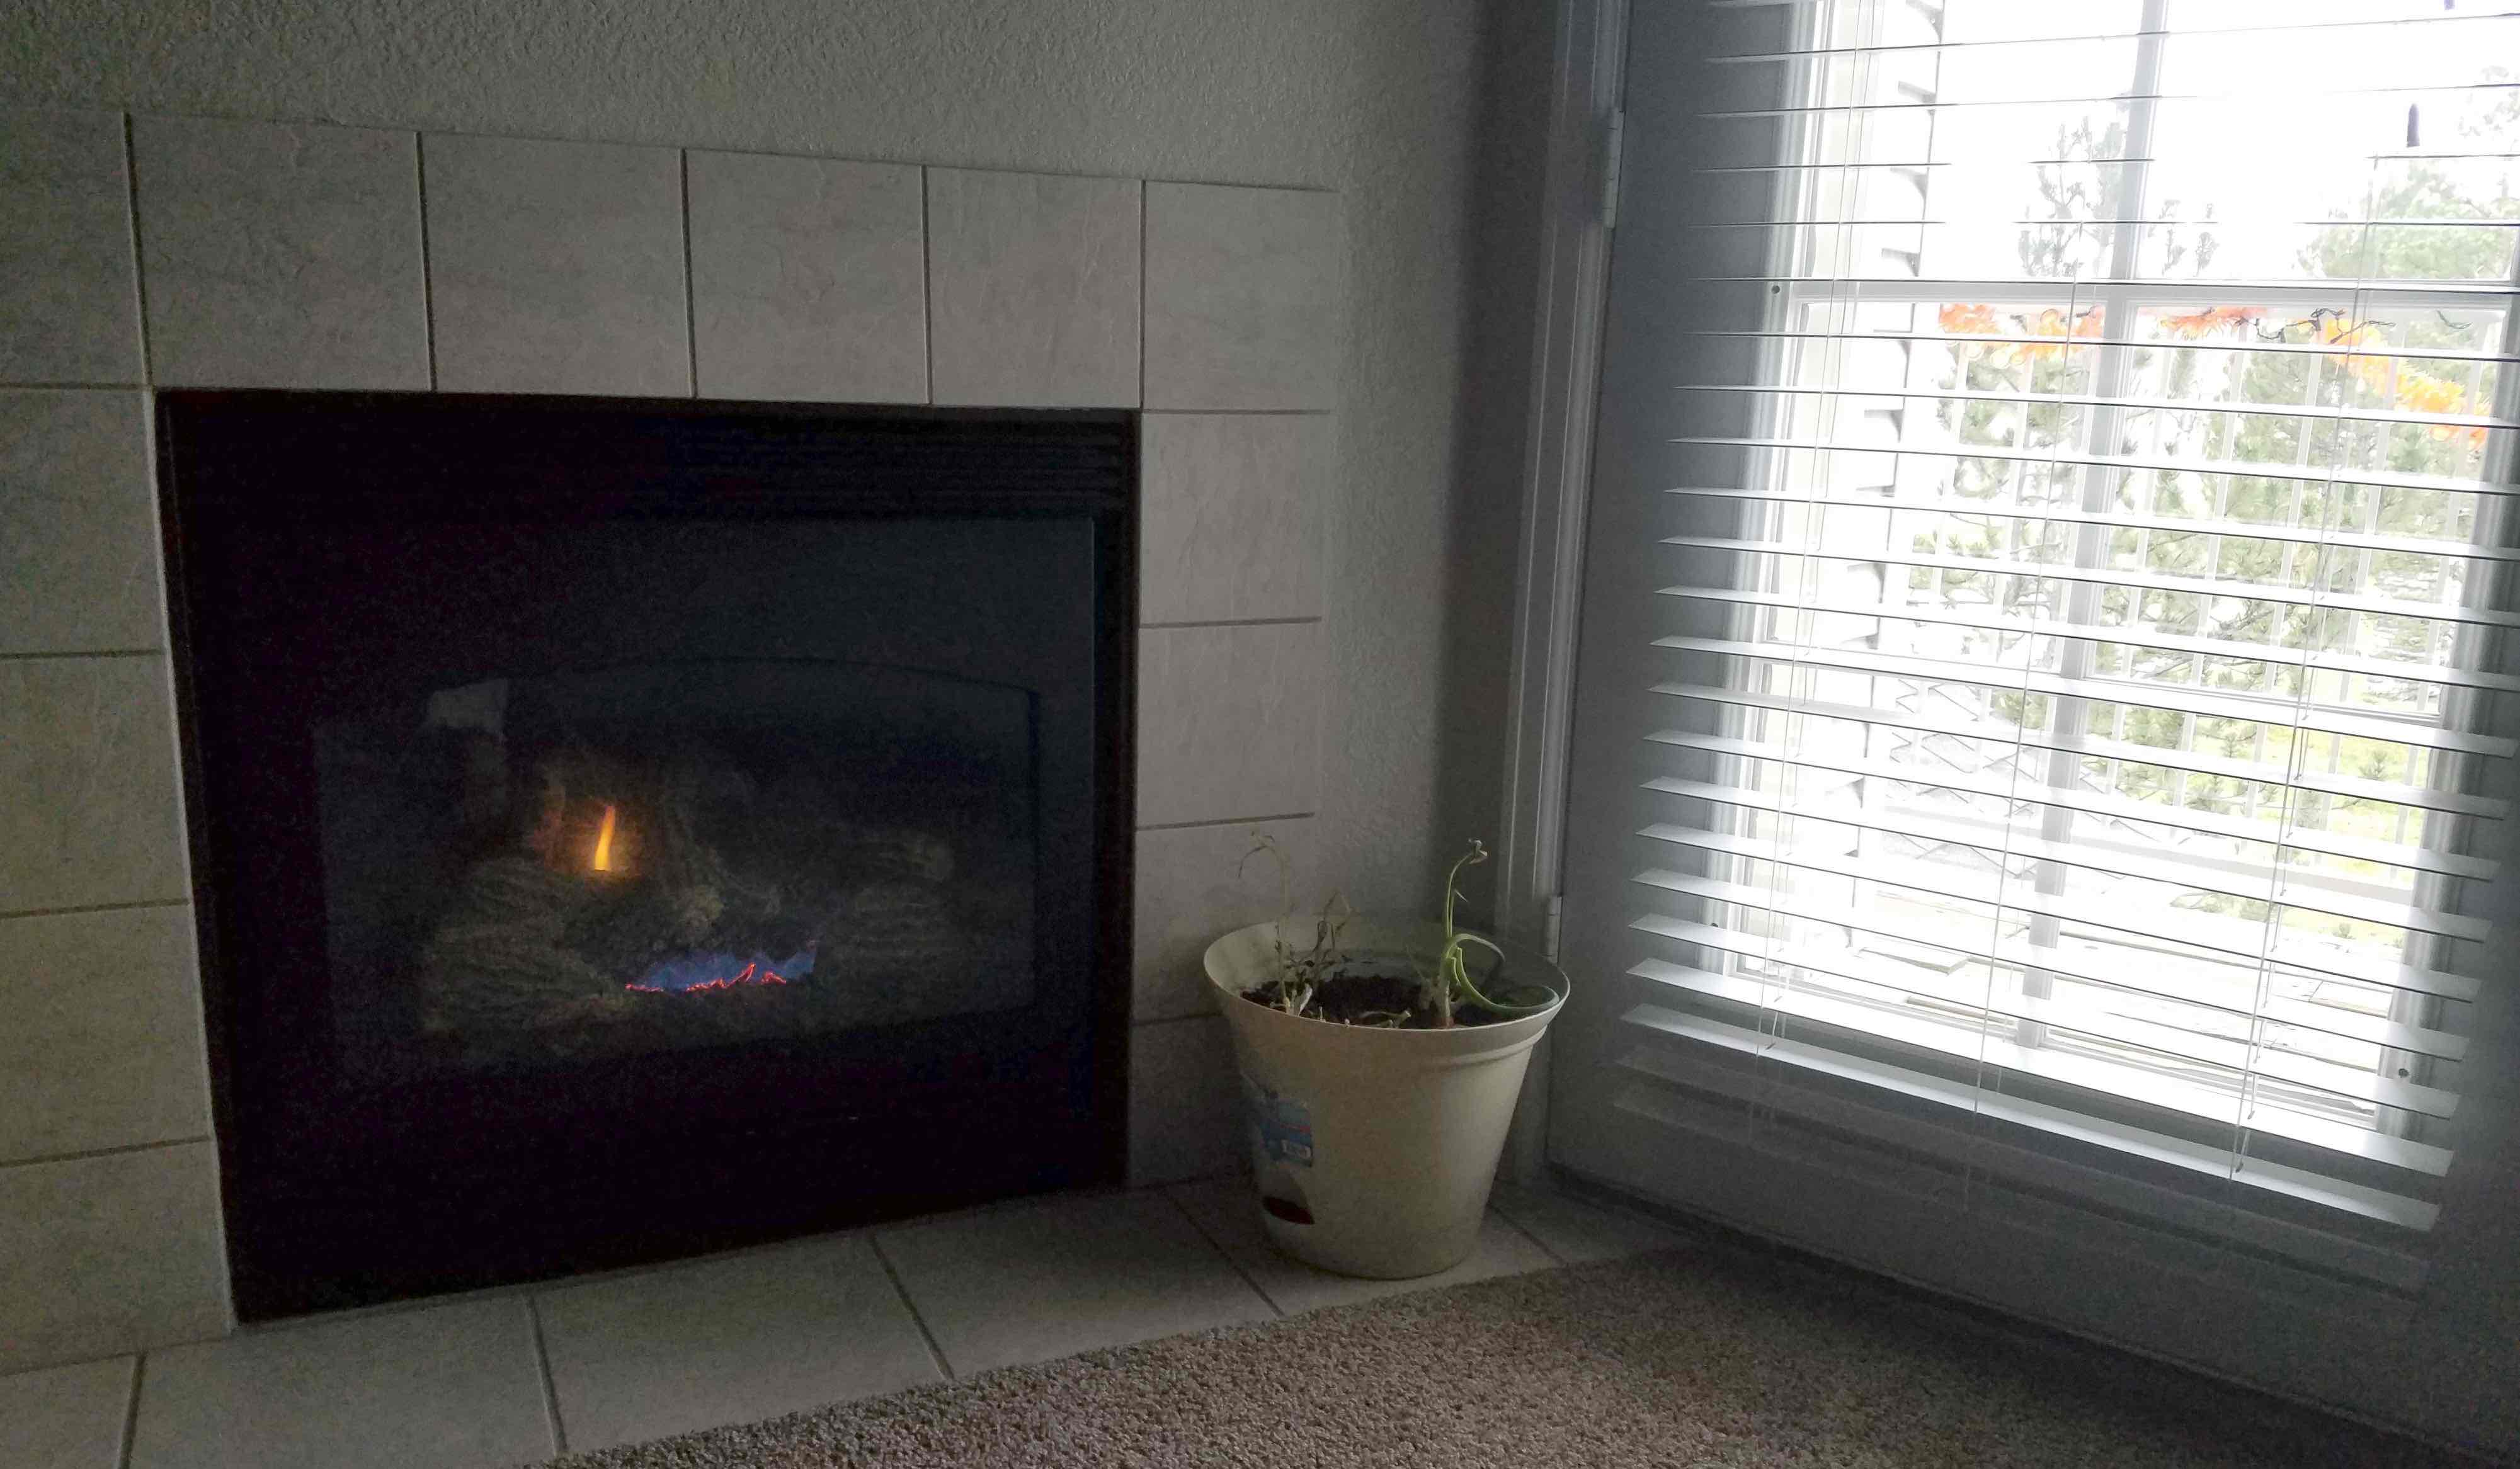 Rainy day by the fireplace in November 2017